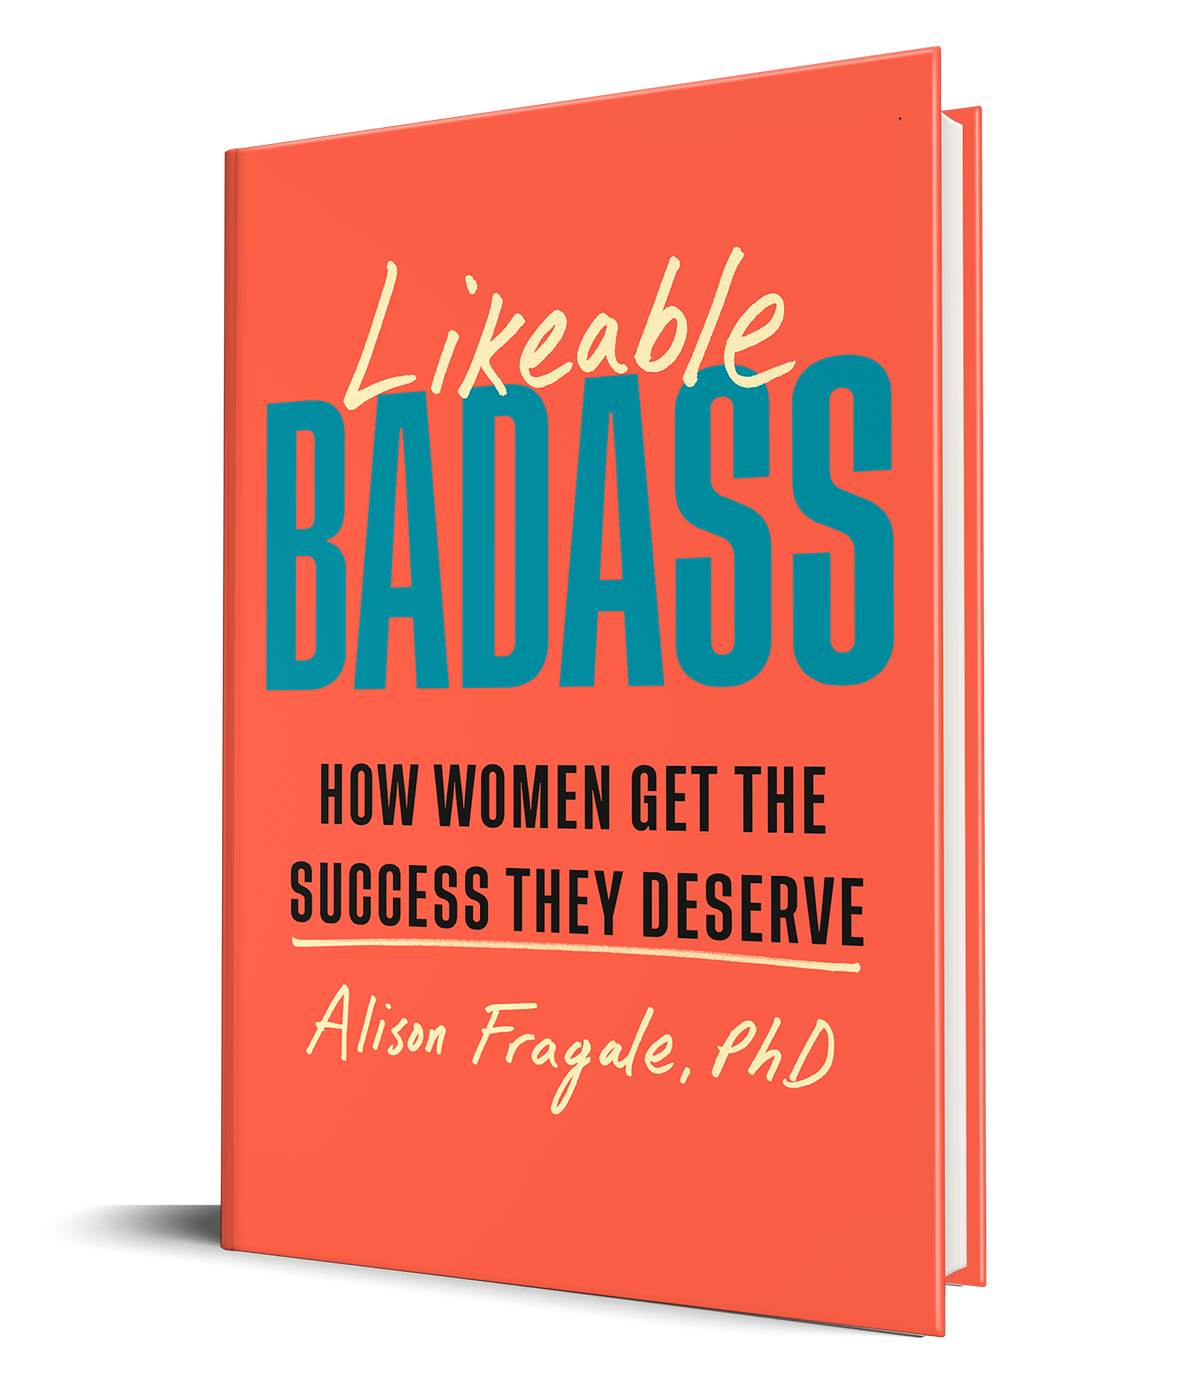 Alison Fragale - Likeable Badass